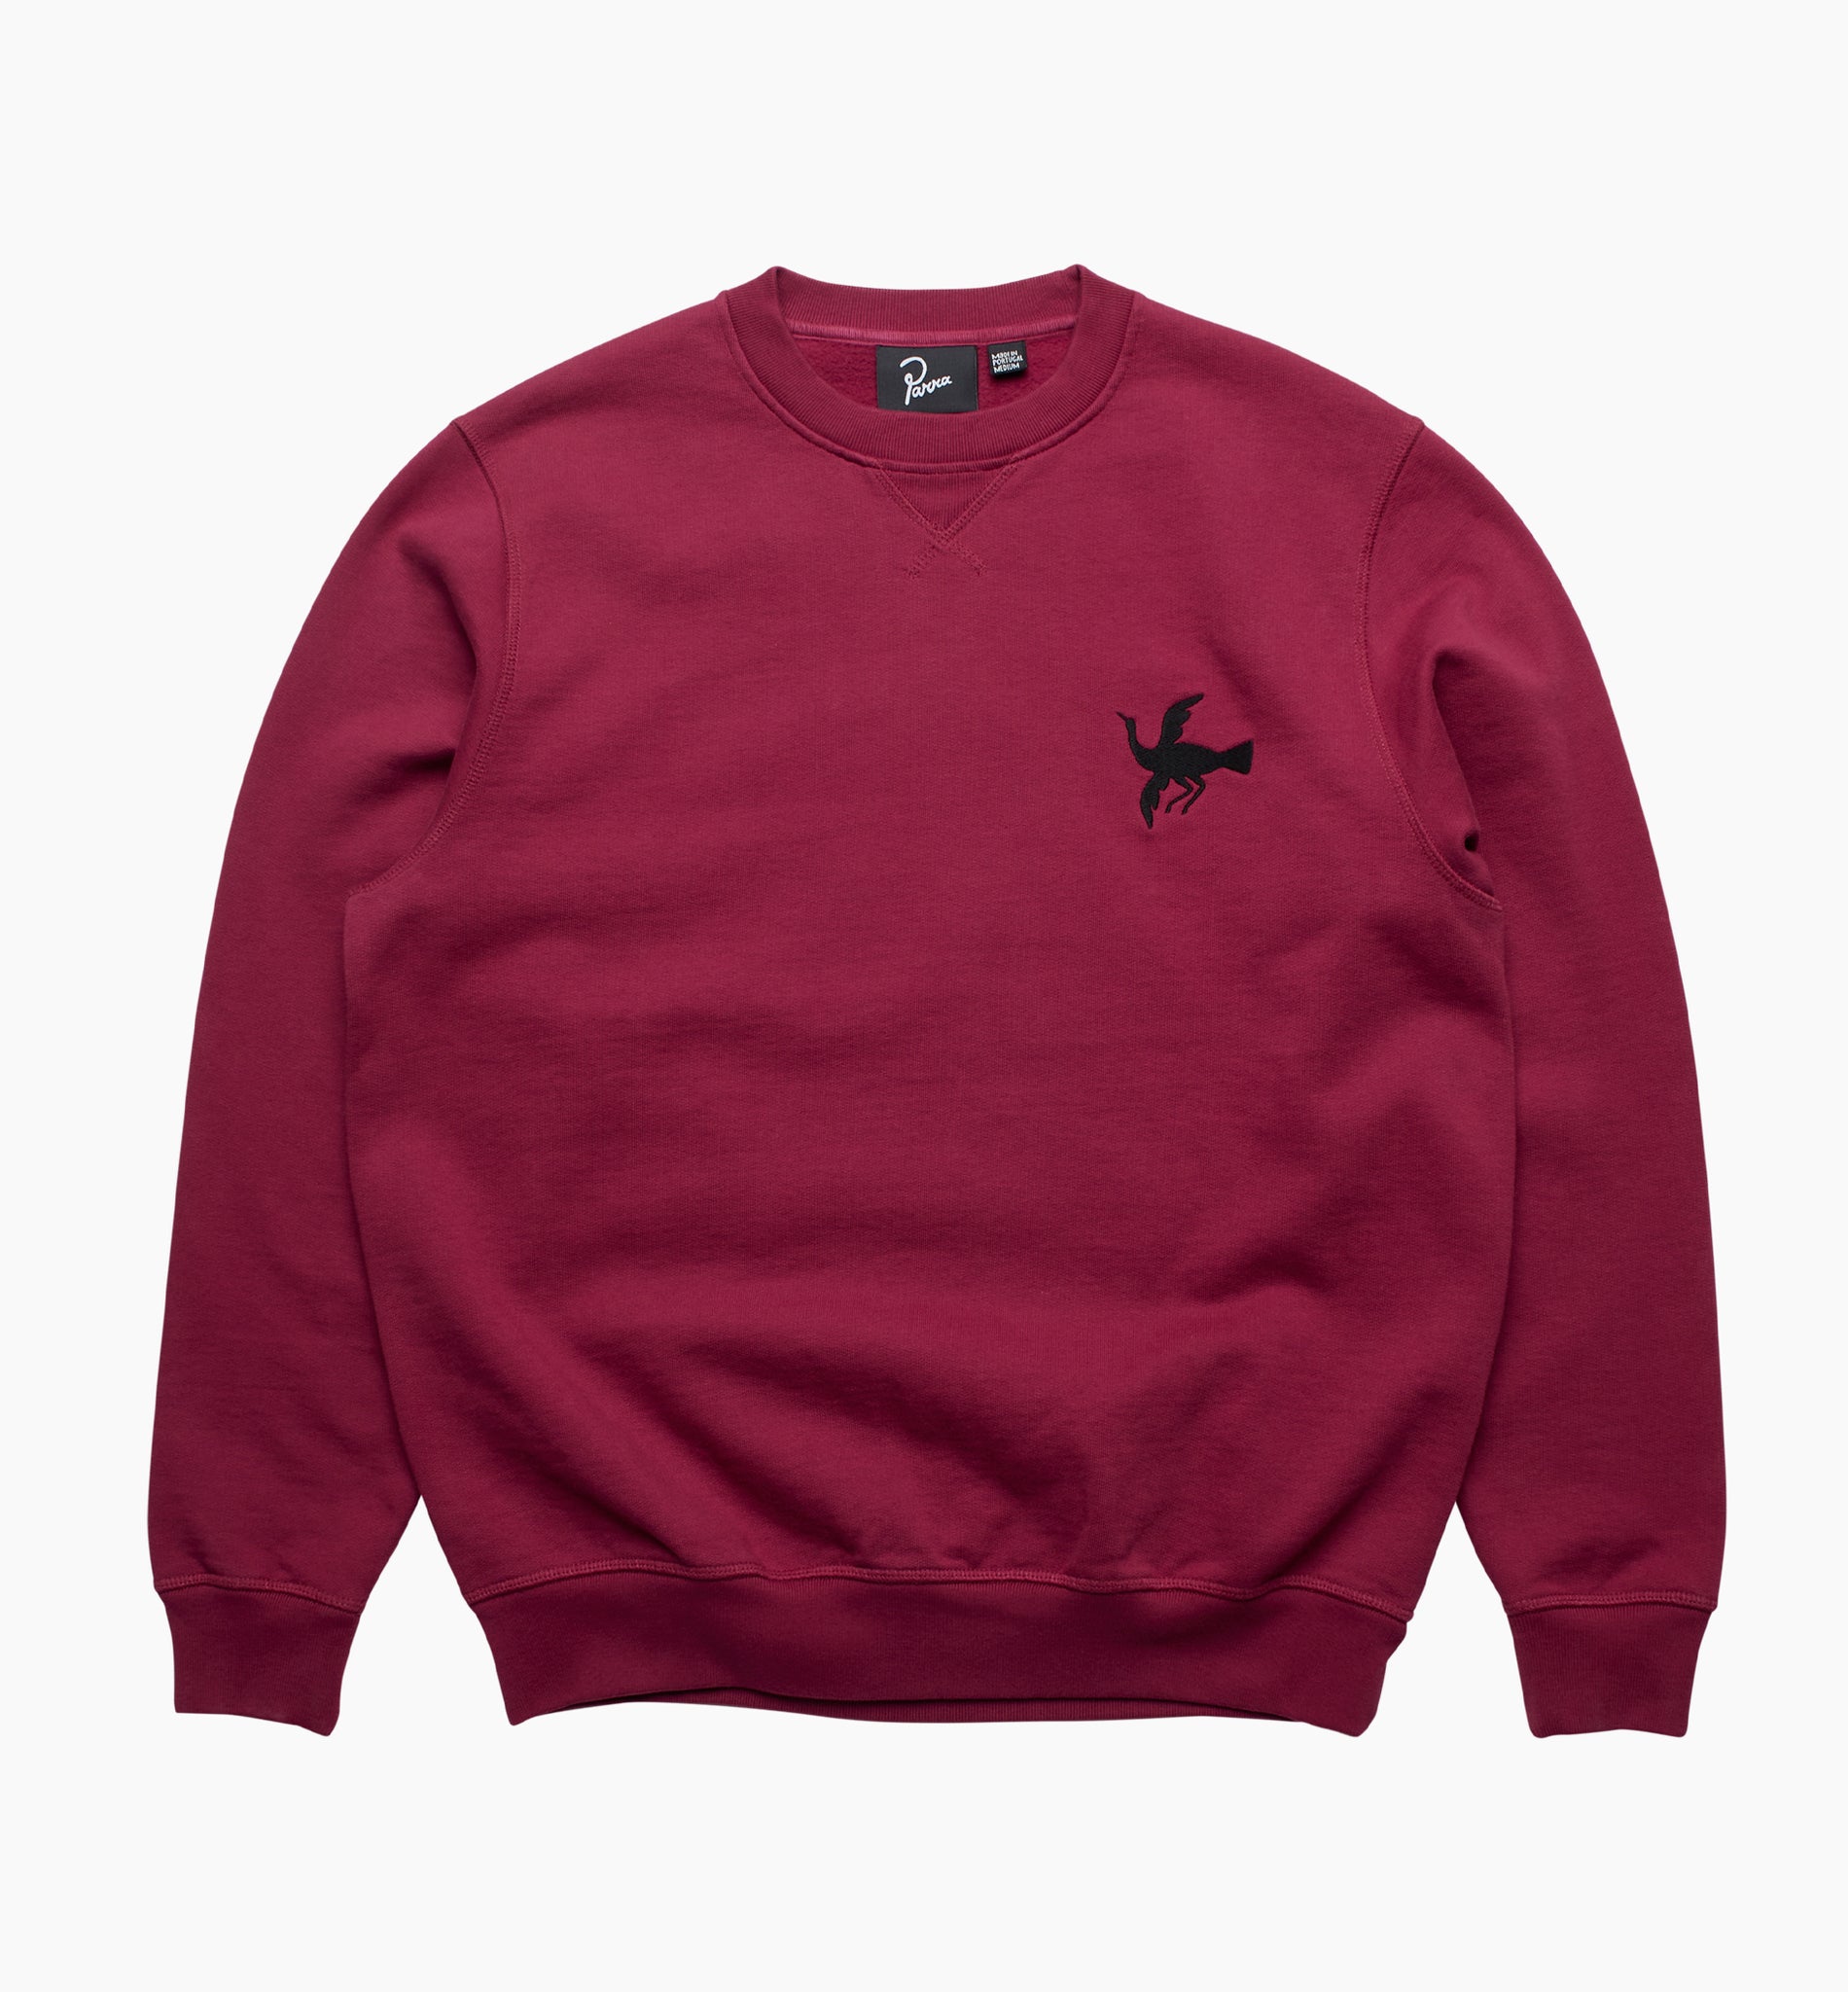 Snaked by a Horse Crew Neck Sweatshirt